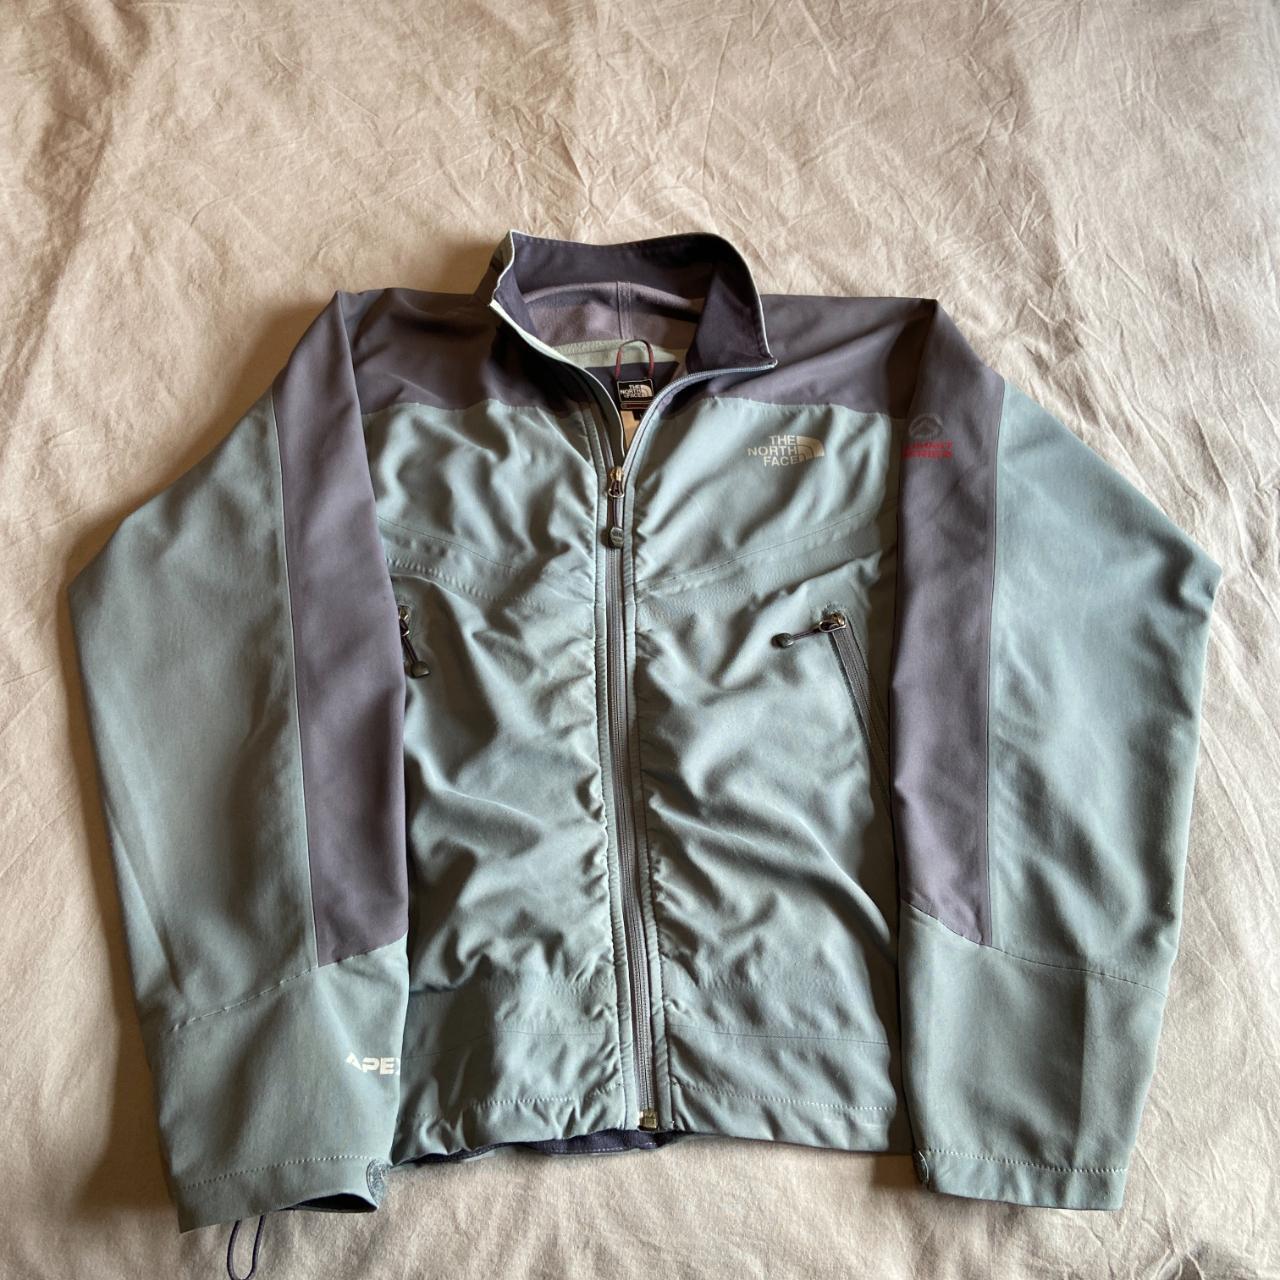 The North Face Men's Blue and Grey Jacket | Depop